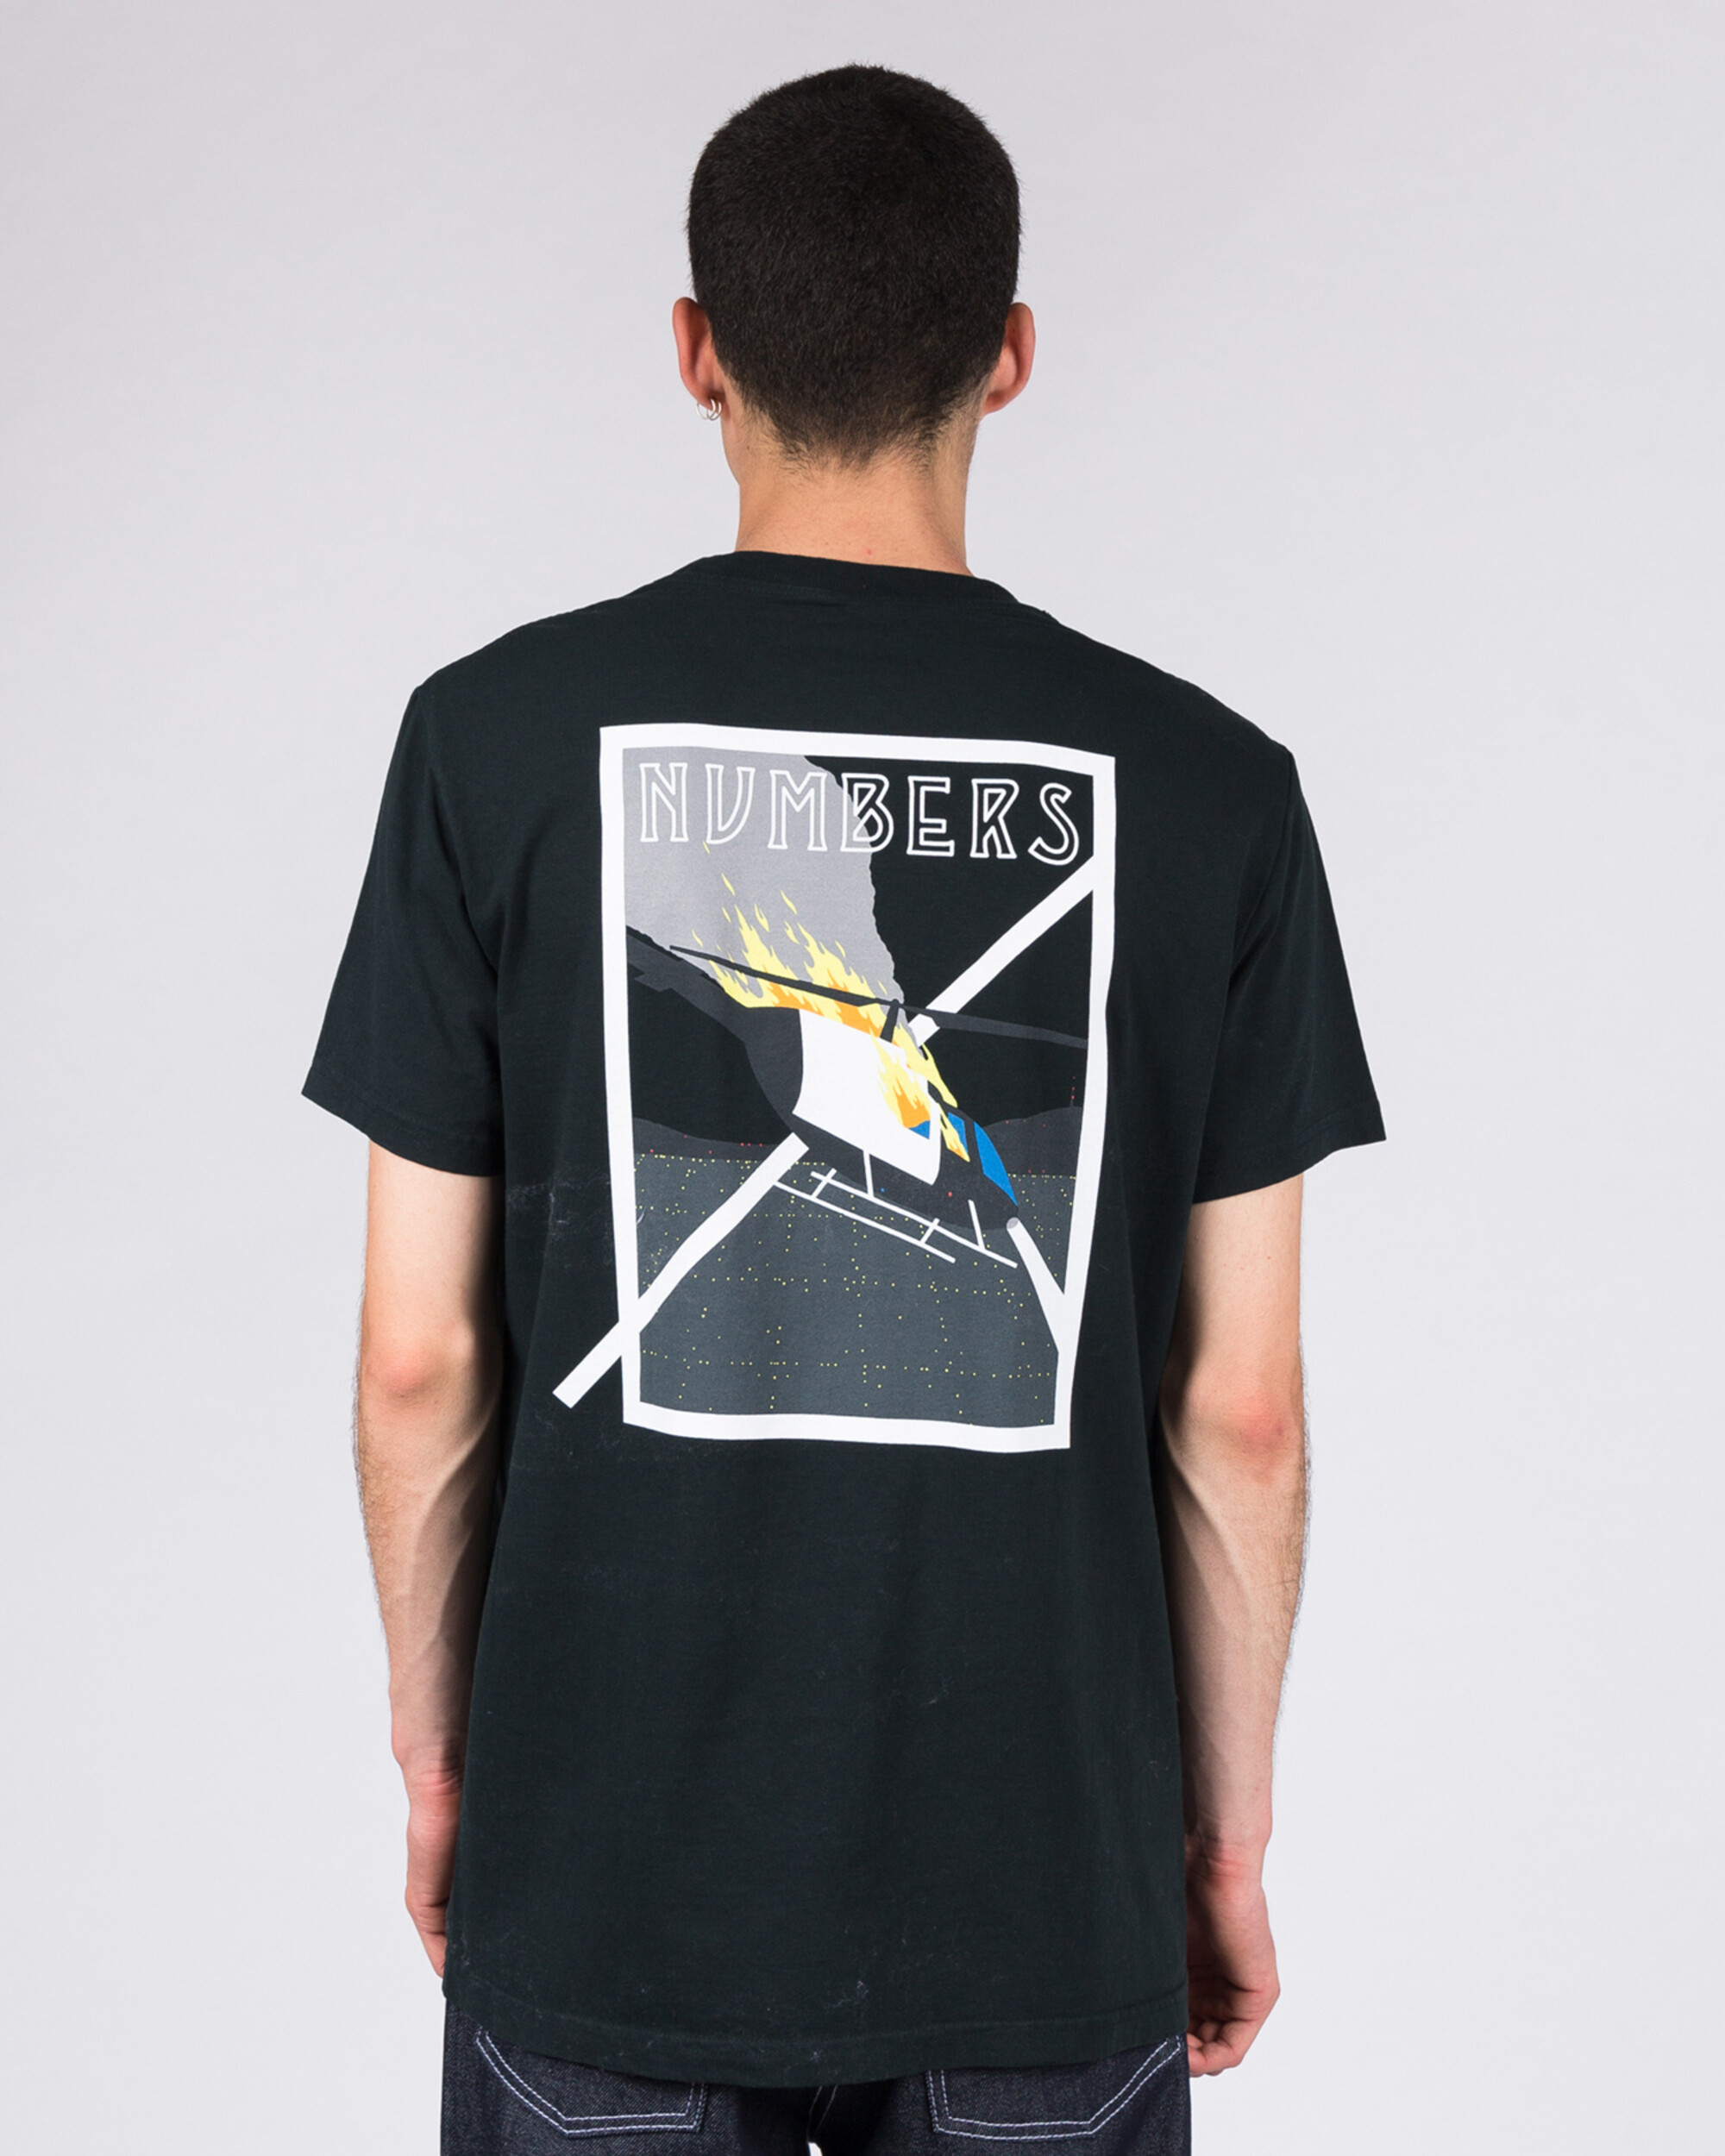 Numbers Edition ITO Downward Spiral Tee Black